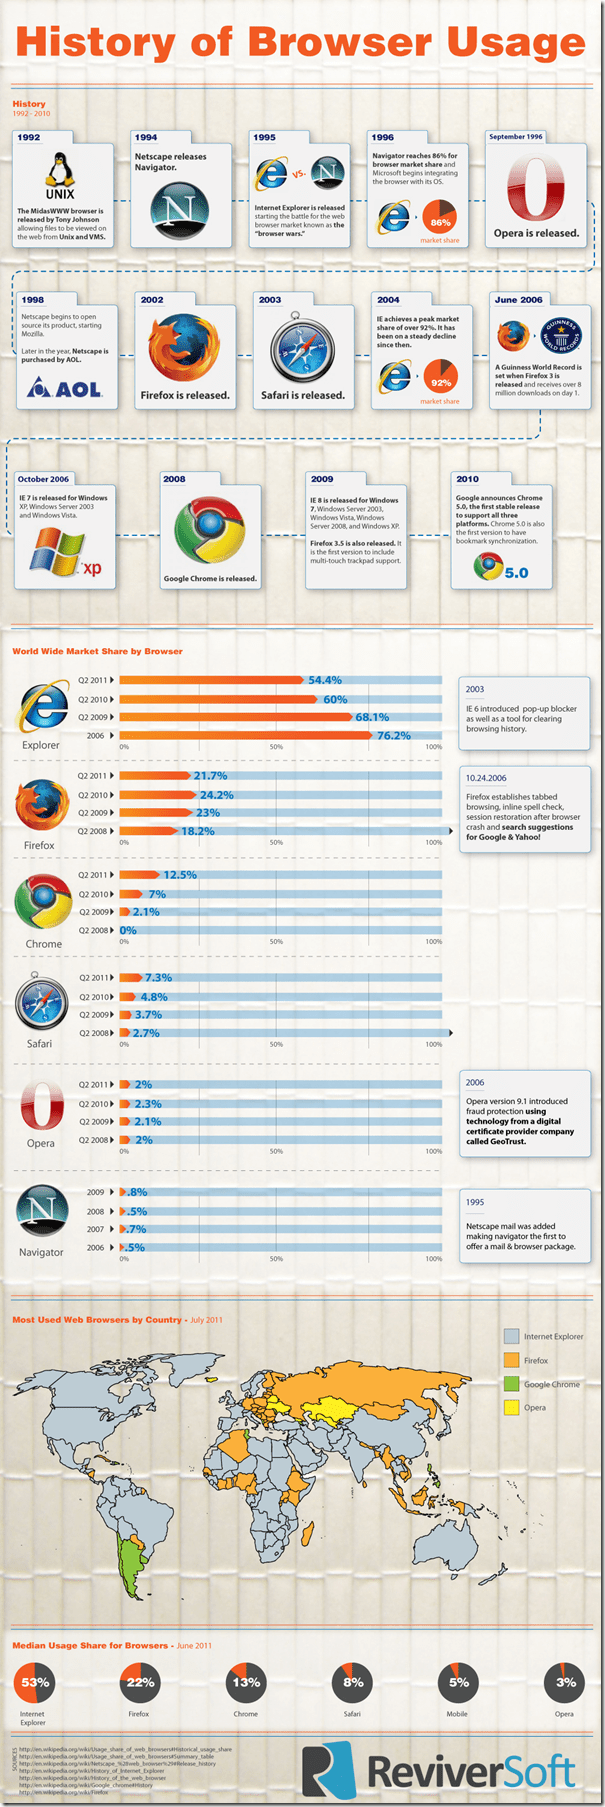 history of web browser usage infographic